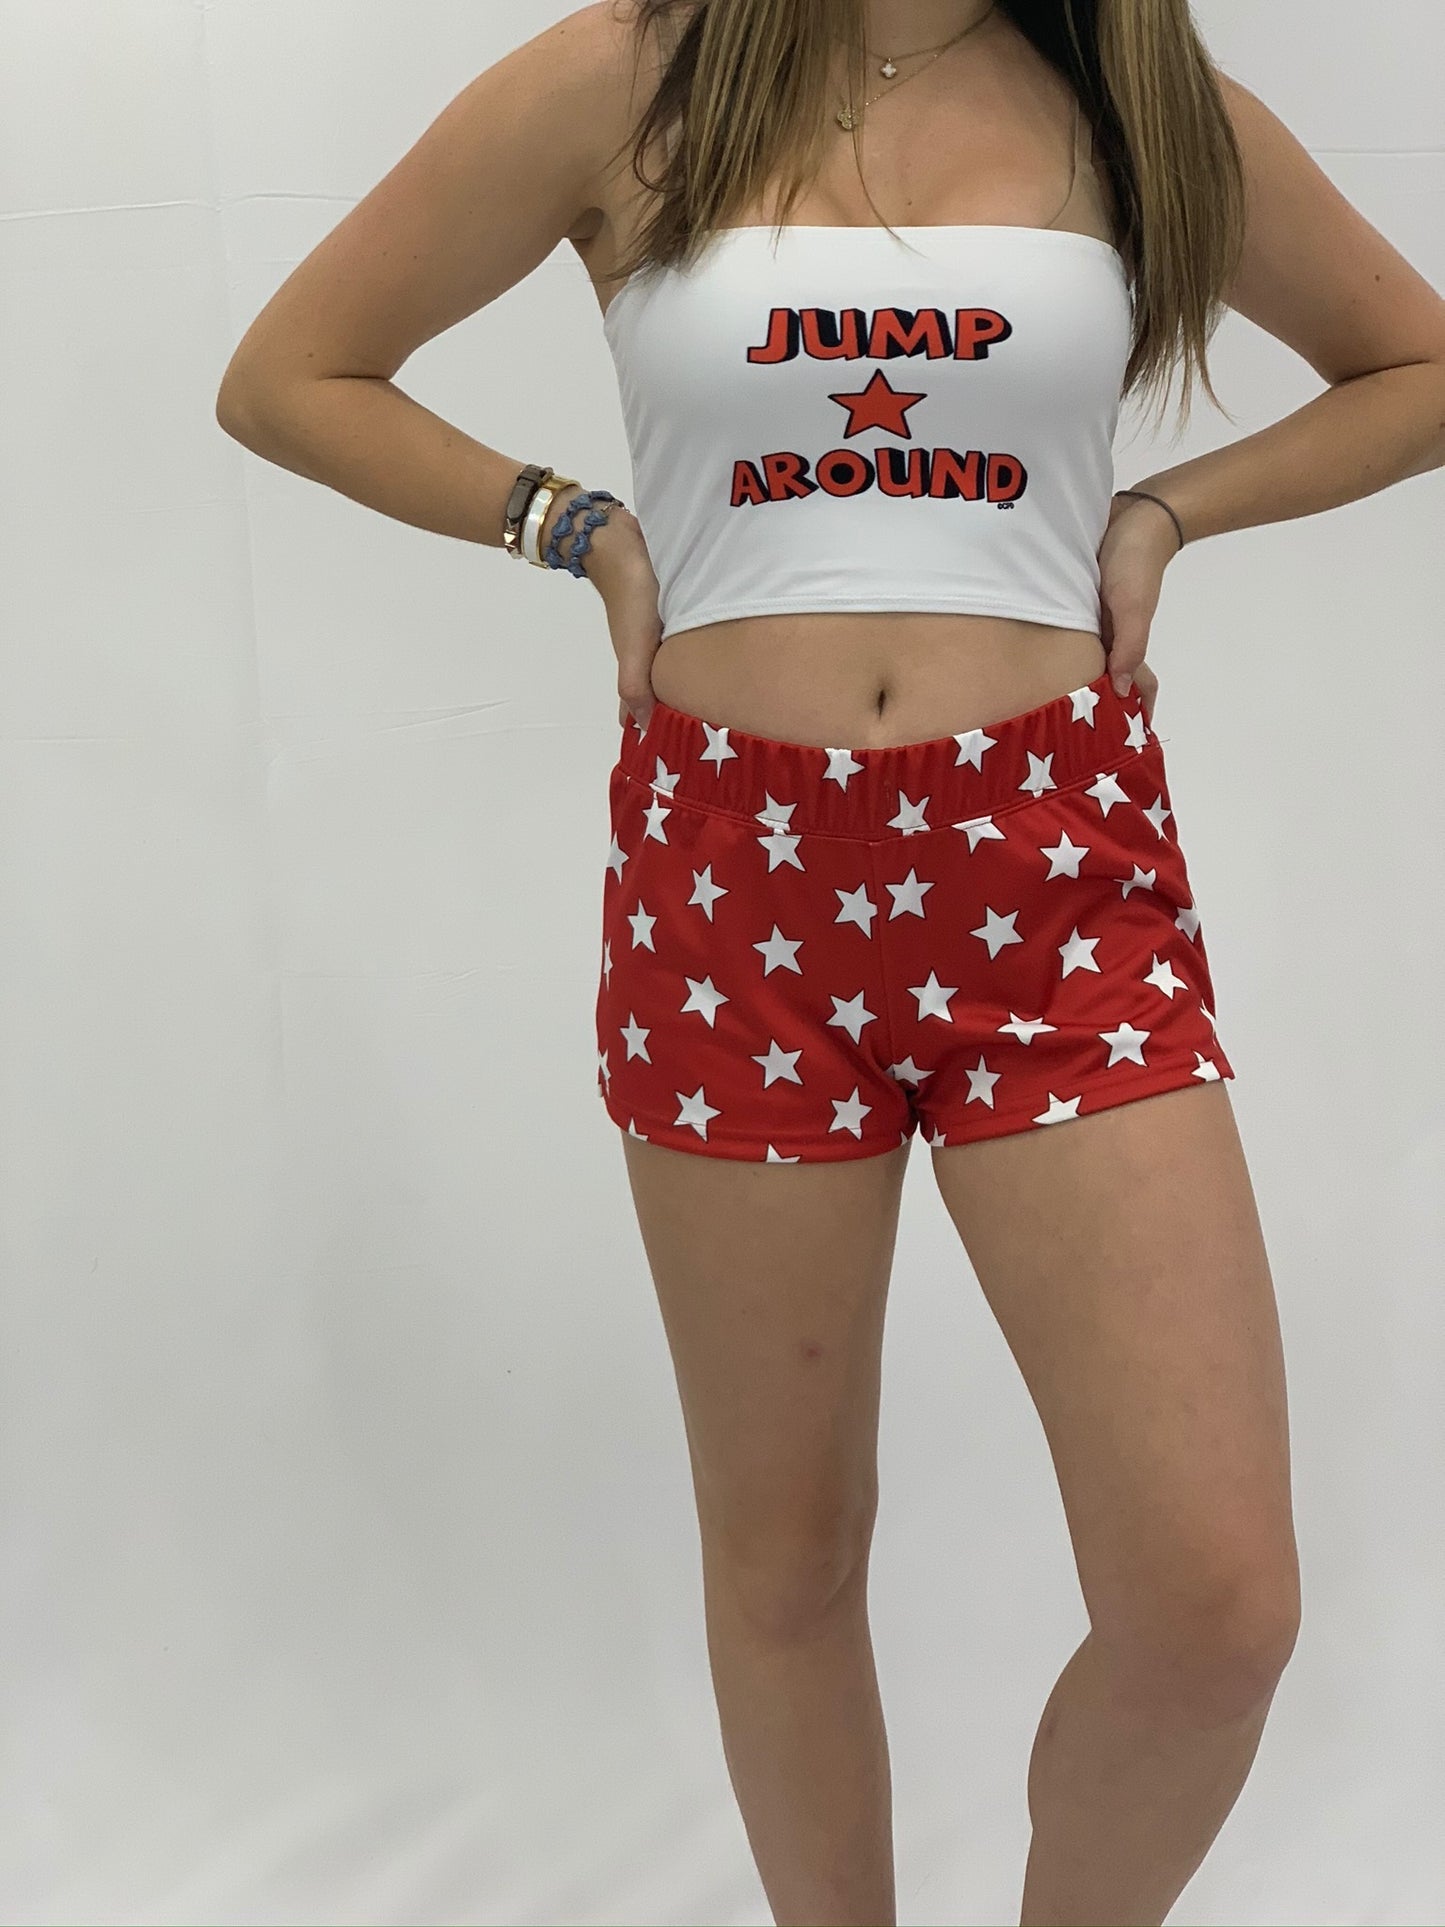 Red & White All-Star Shorts